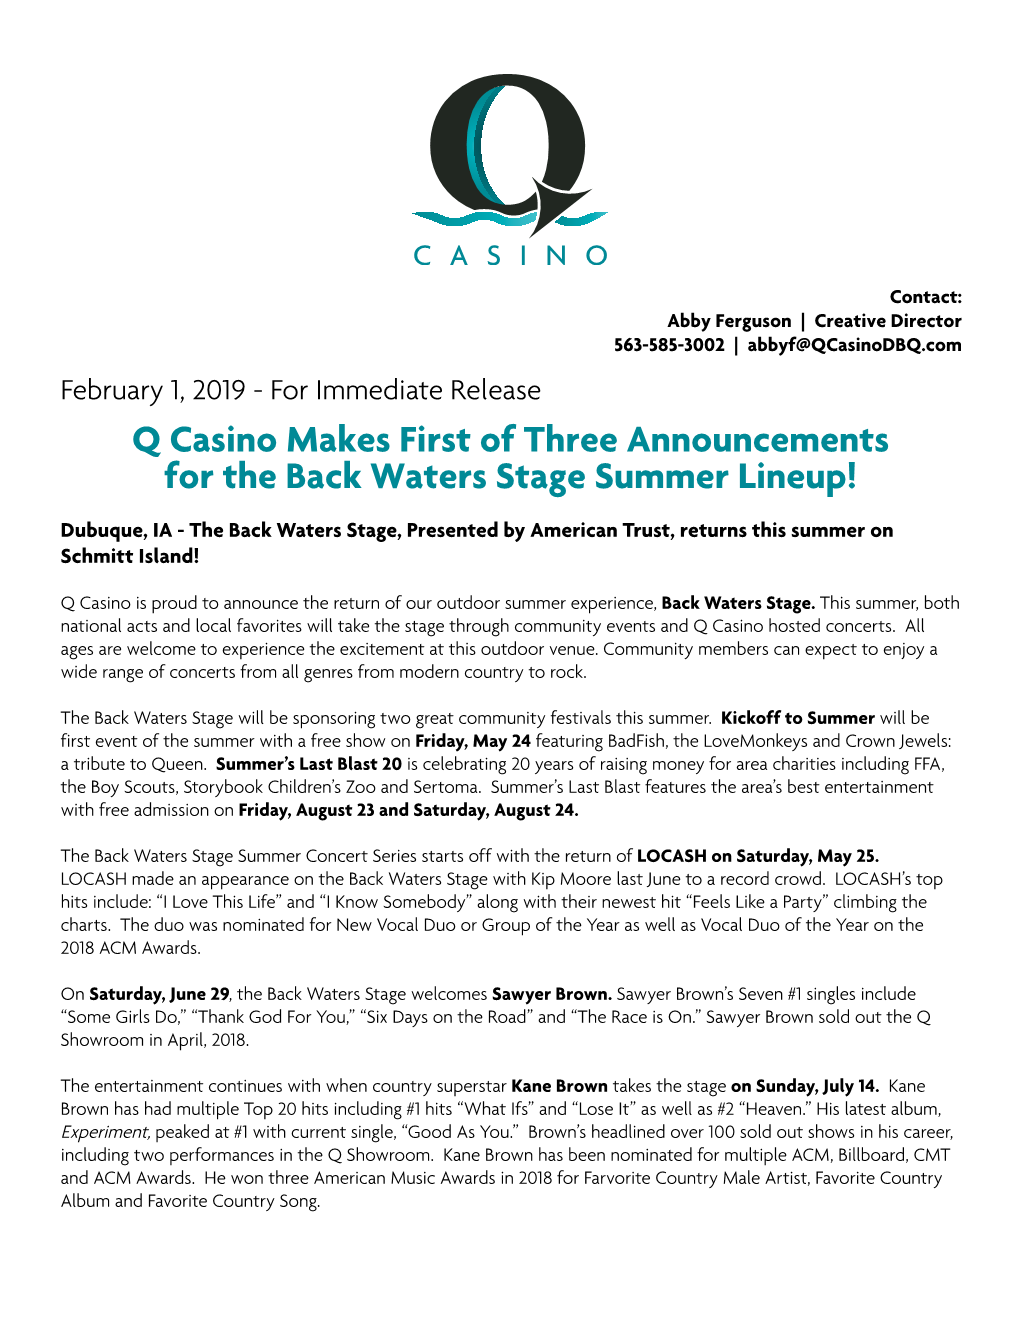 Q Casino Makes First of Three Announcements for the Back Waters Stage Summer Lineup!